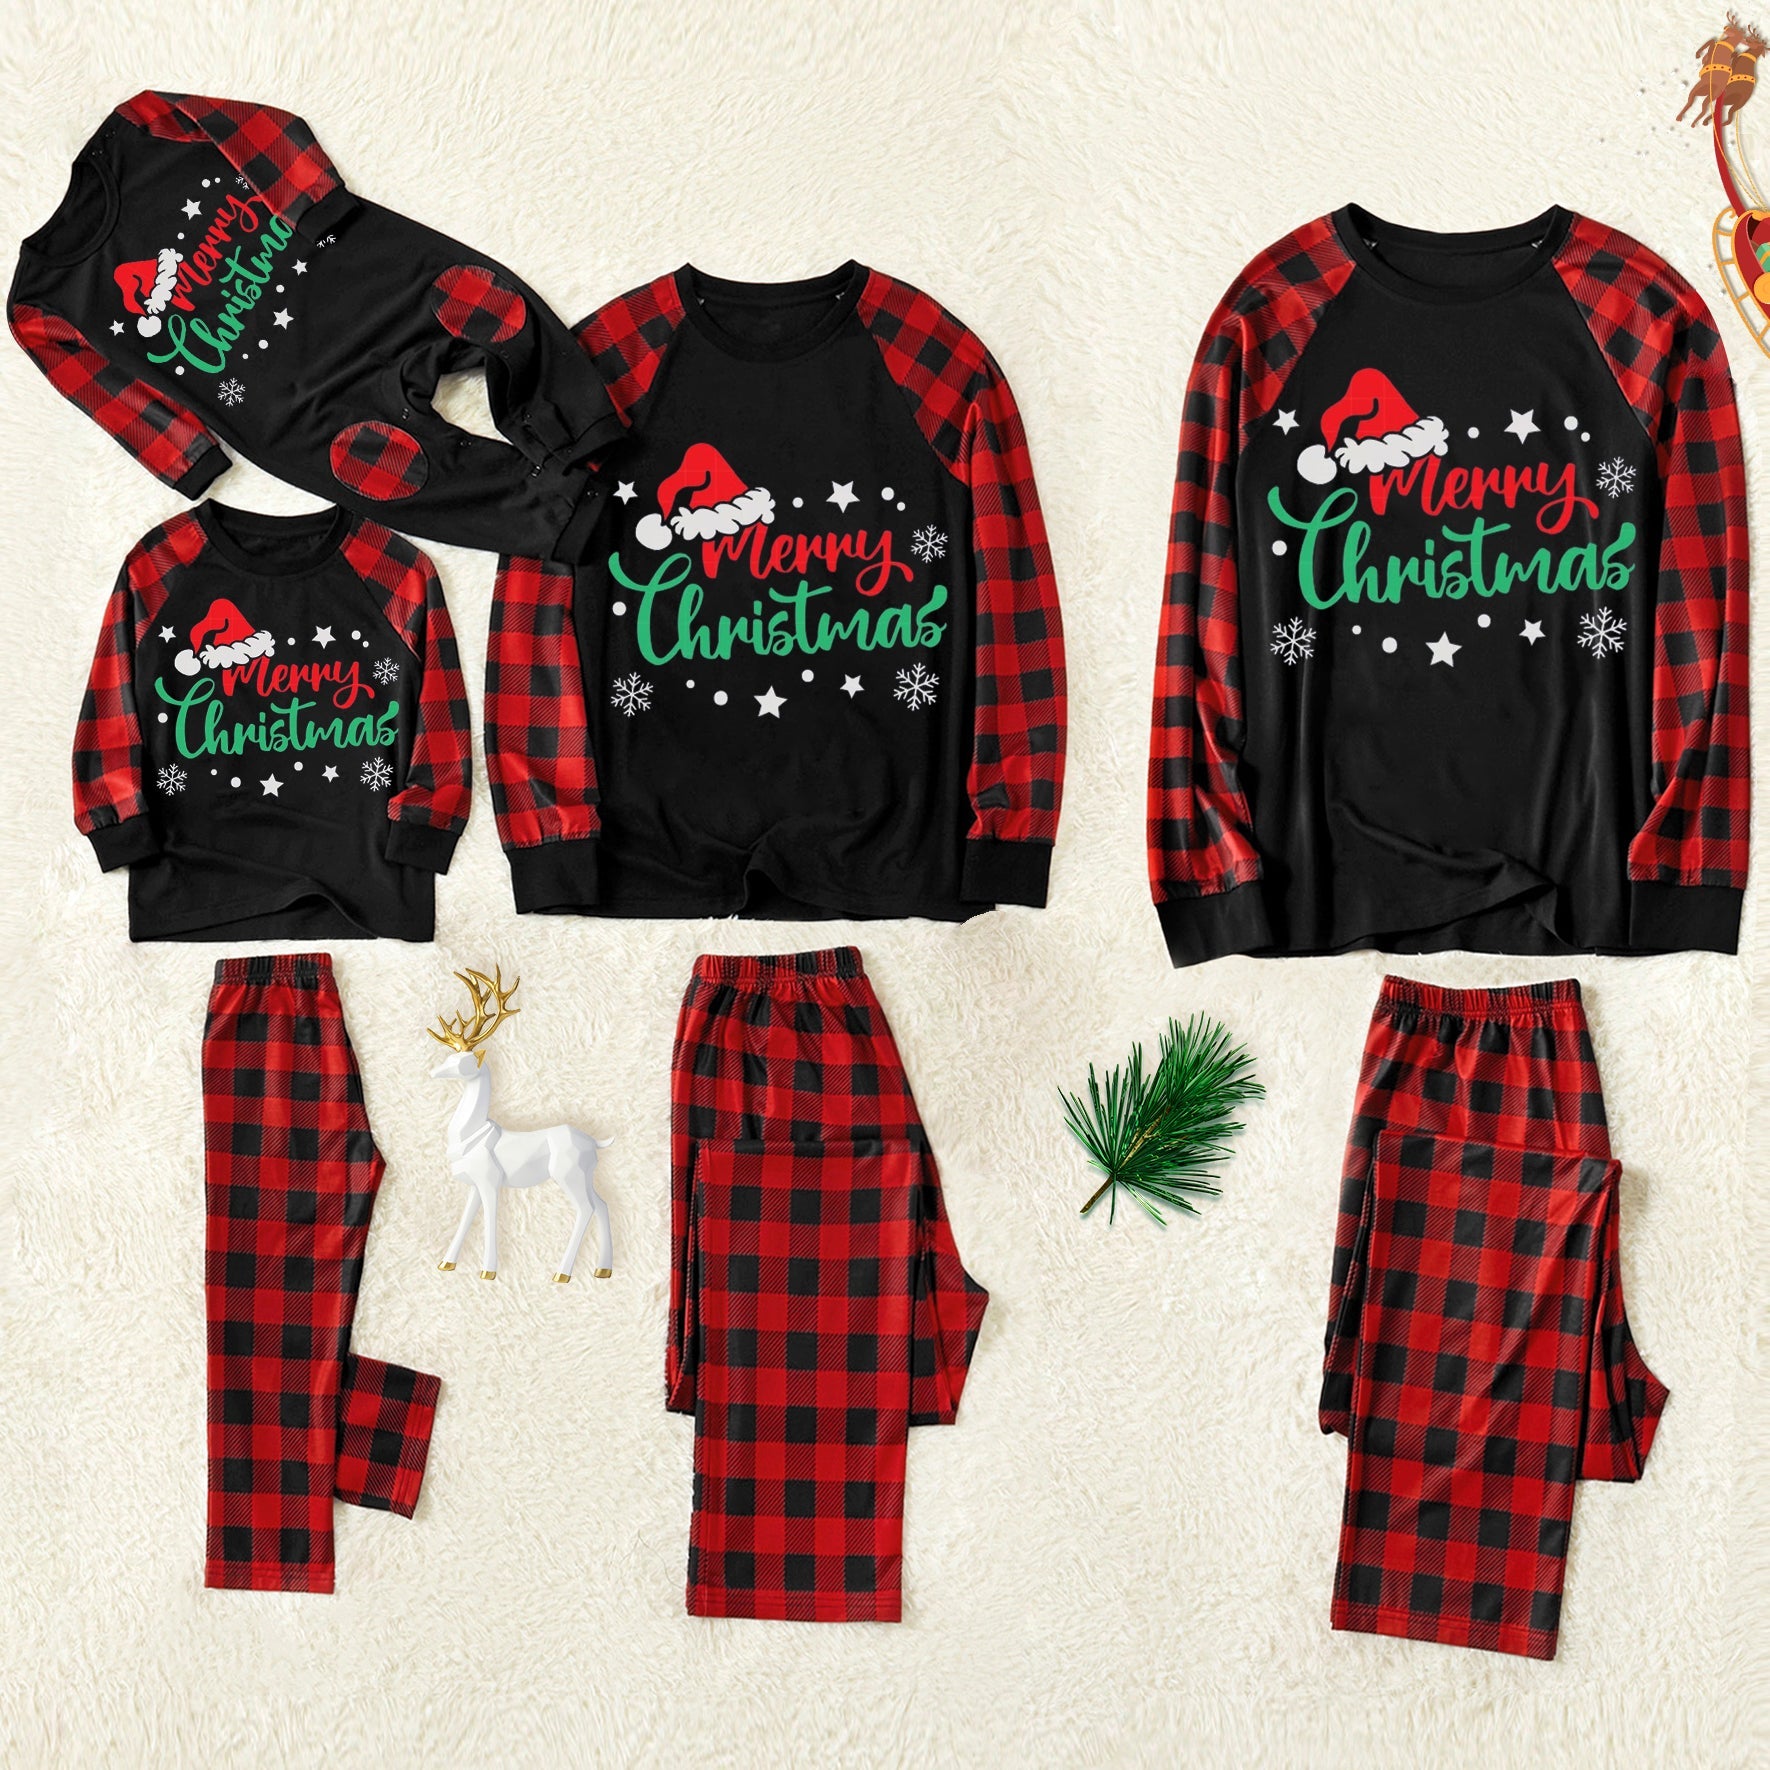 Christmas Hat Patterned and 'Merry Christmas' Letter Print Patterned Contrast Black top and Black & Red Plaid Pants Family Matching Pajamas Set